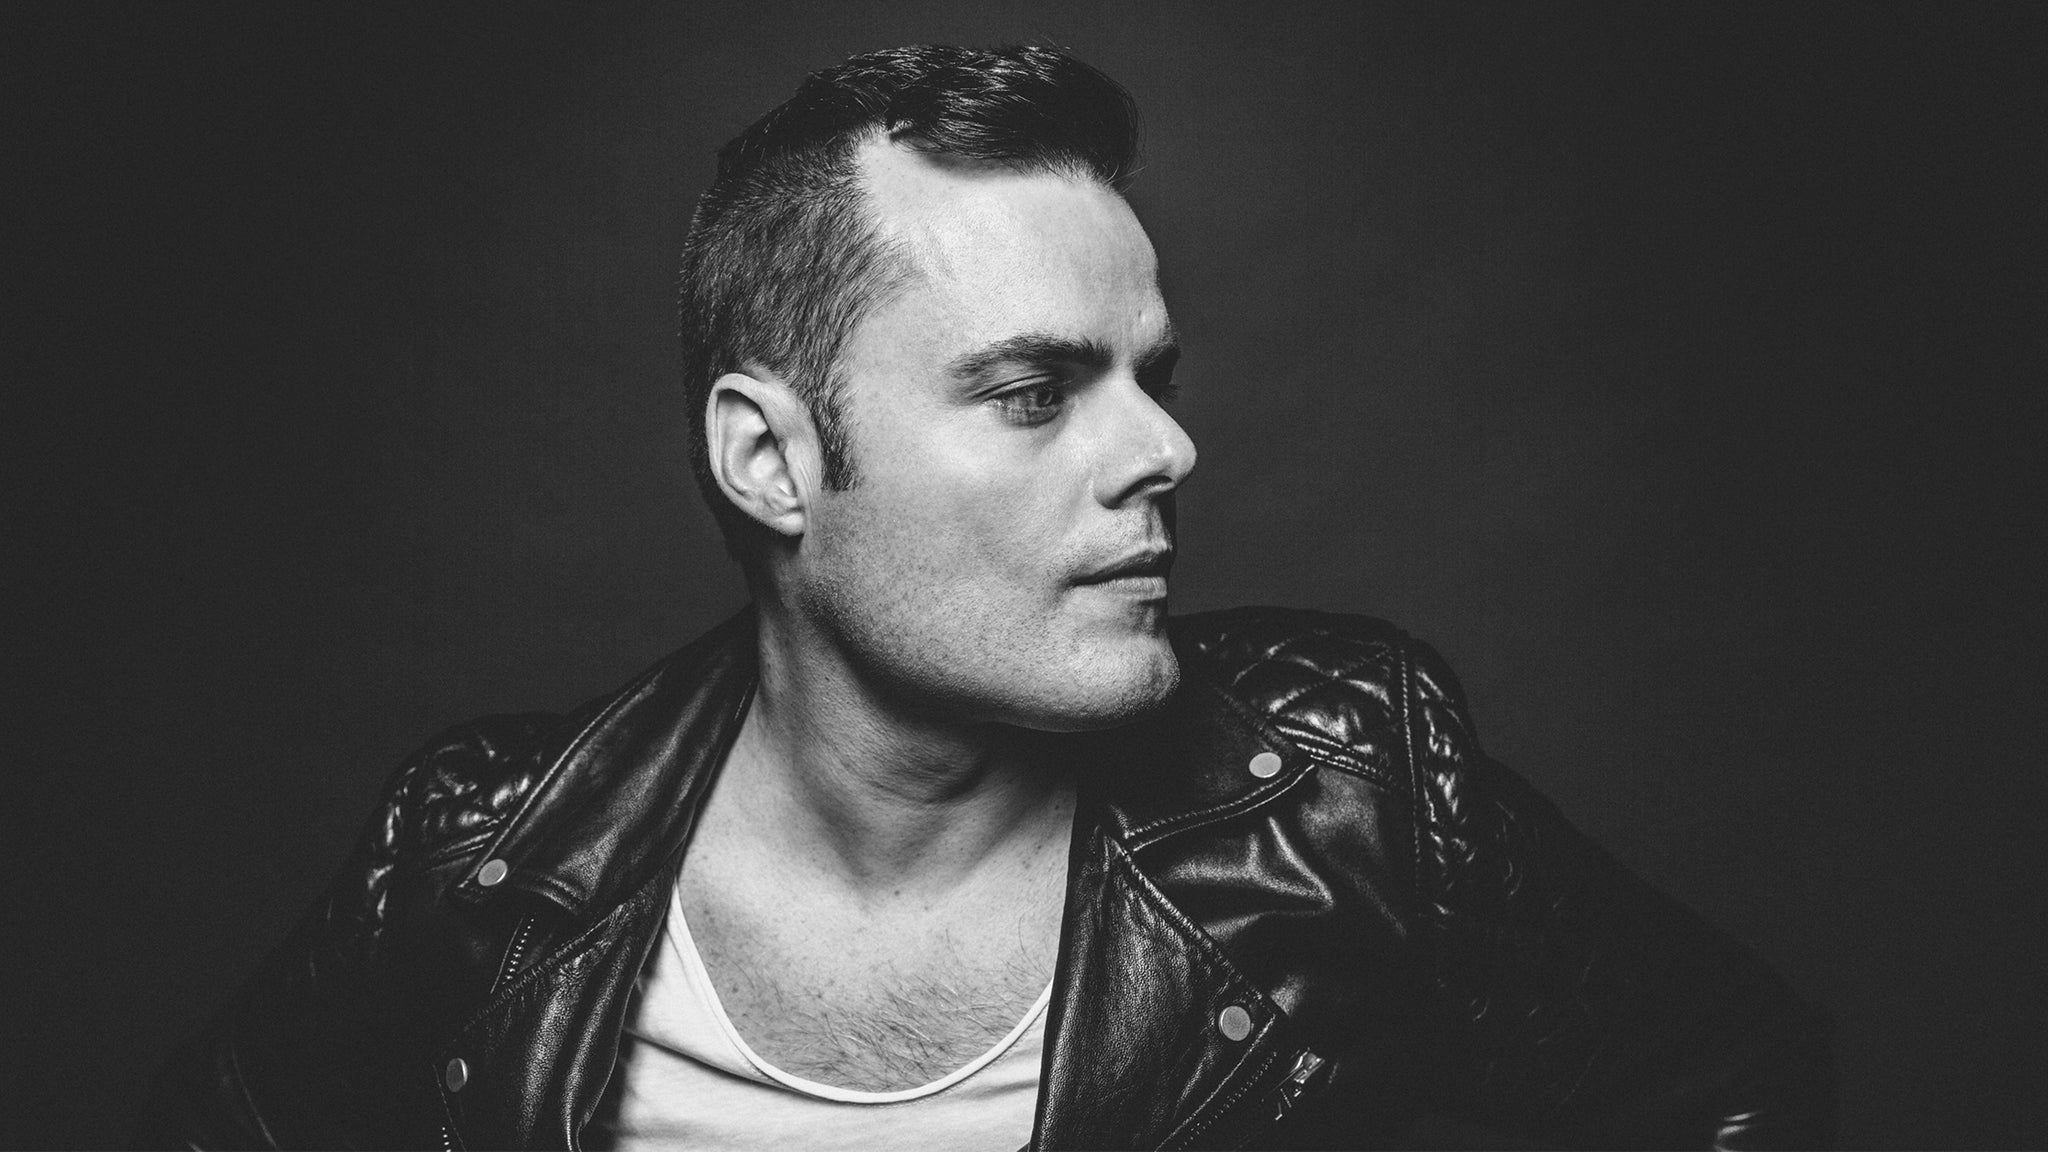 working presale code to One Vision of Queen Feat. Marc Martel affordable tickets in Ridgefield